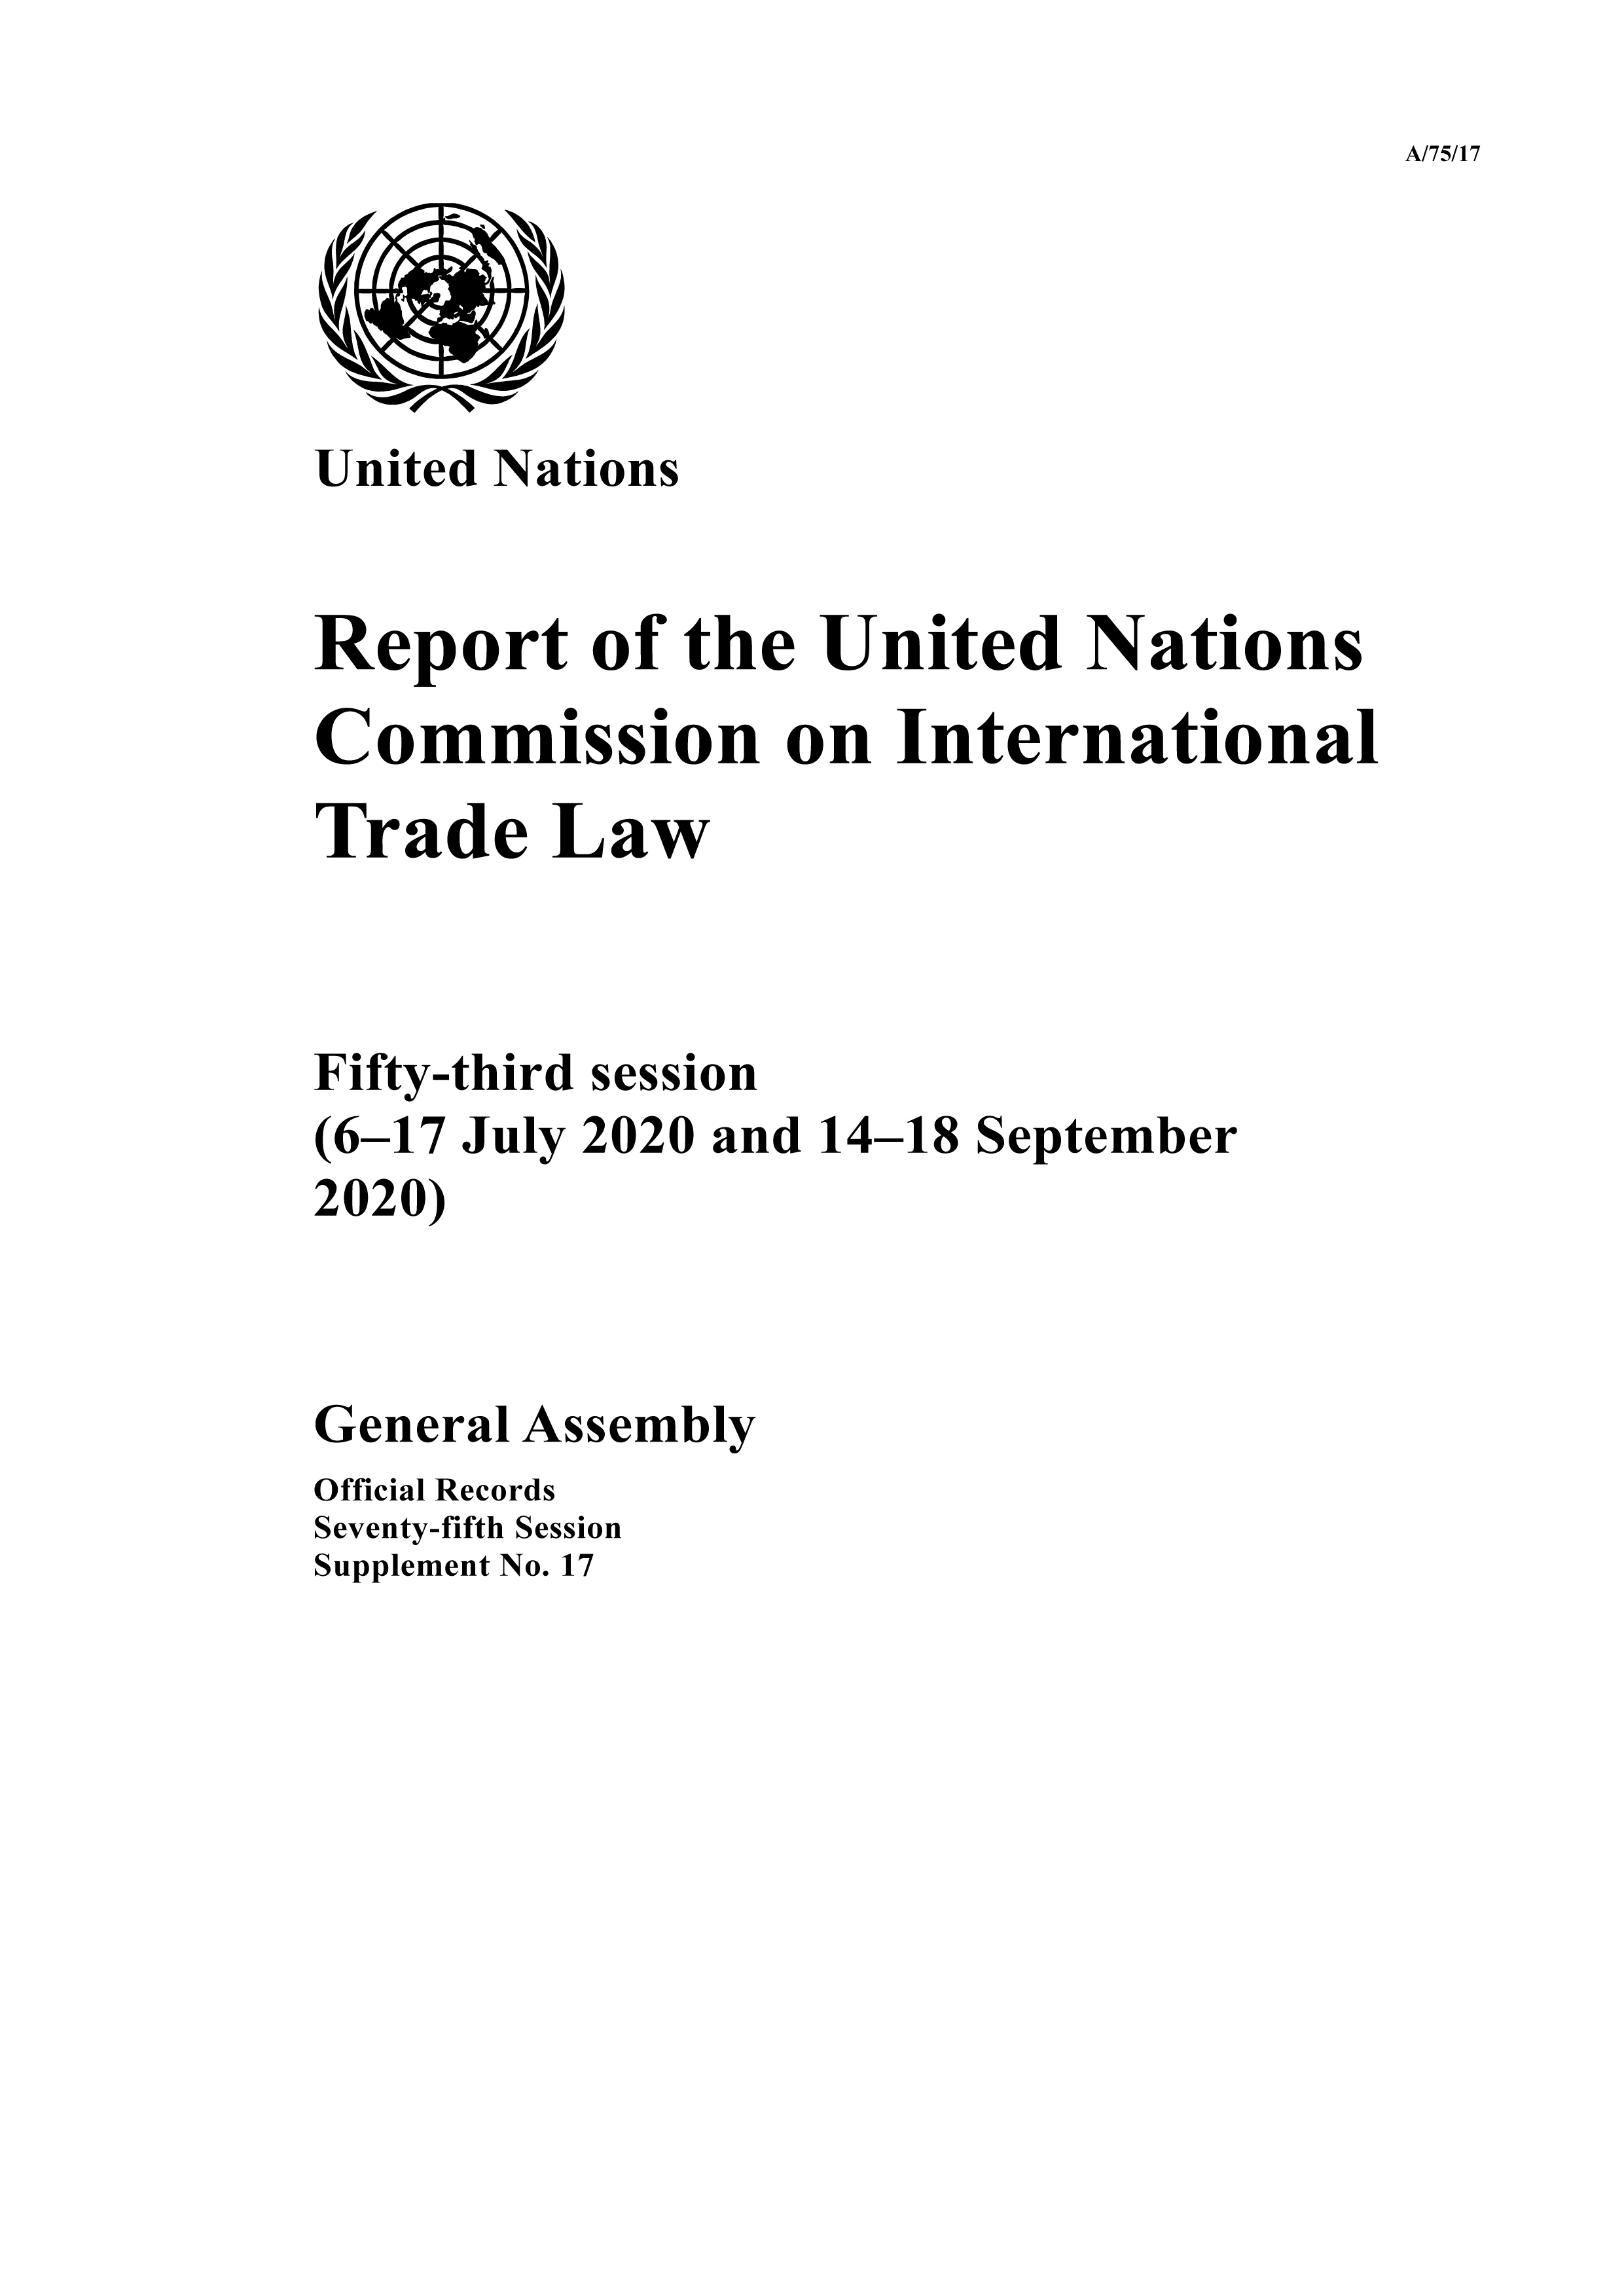 image of Report of the United Nations Commission on International Trade Law on the first part of its fifty-third session, held online, from 6 to 17 July 2020